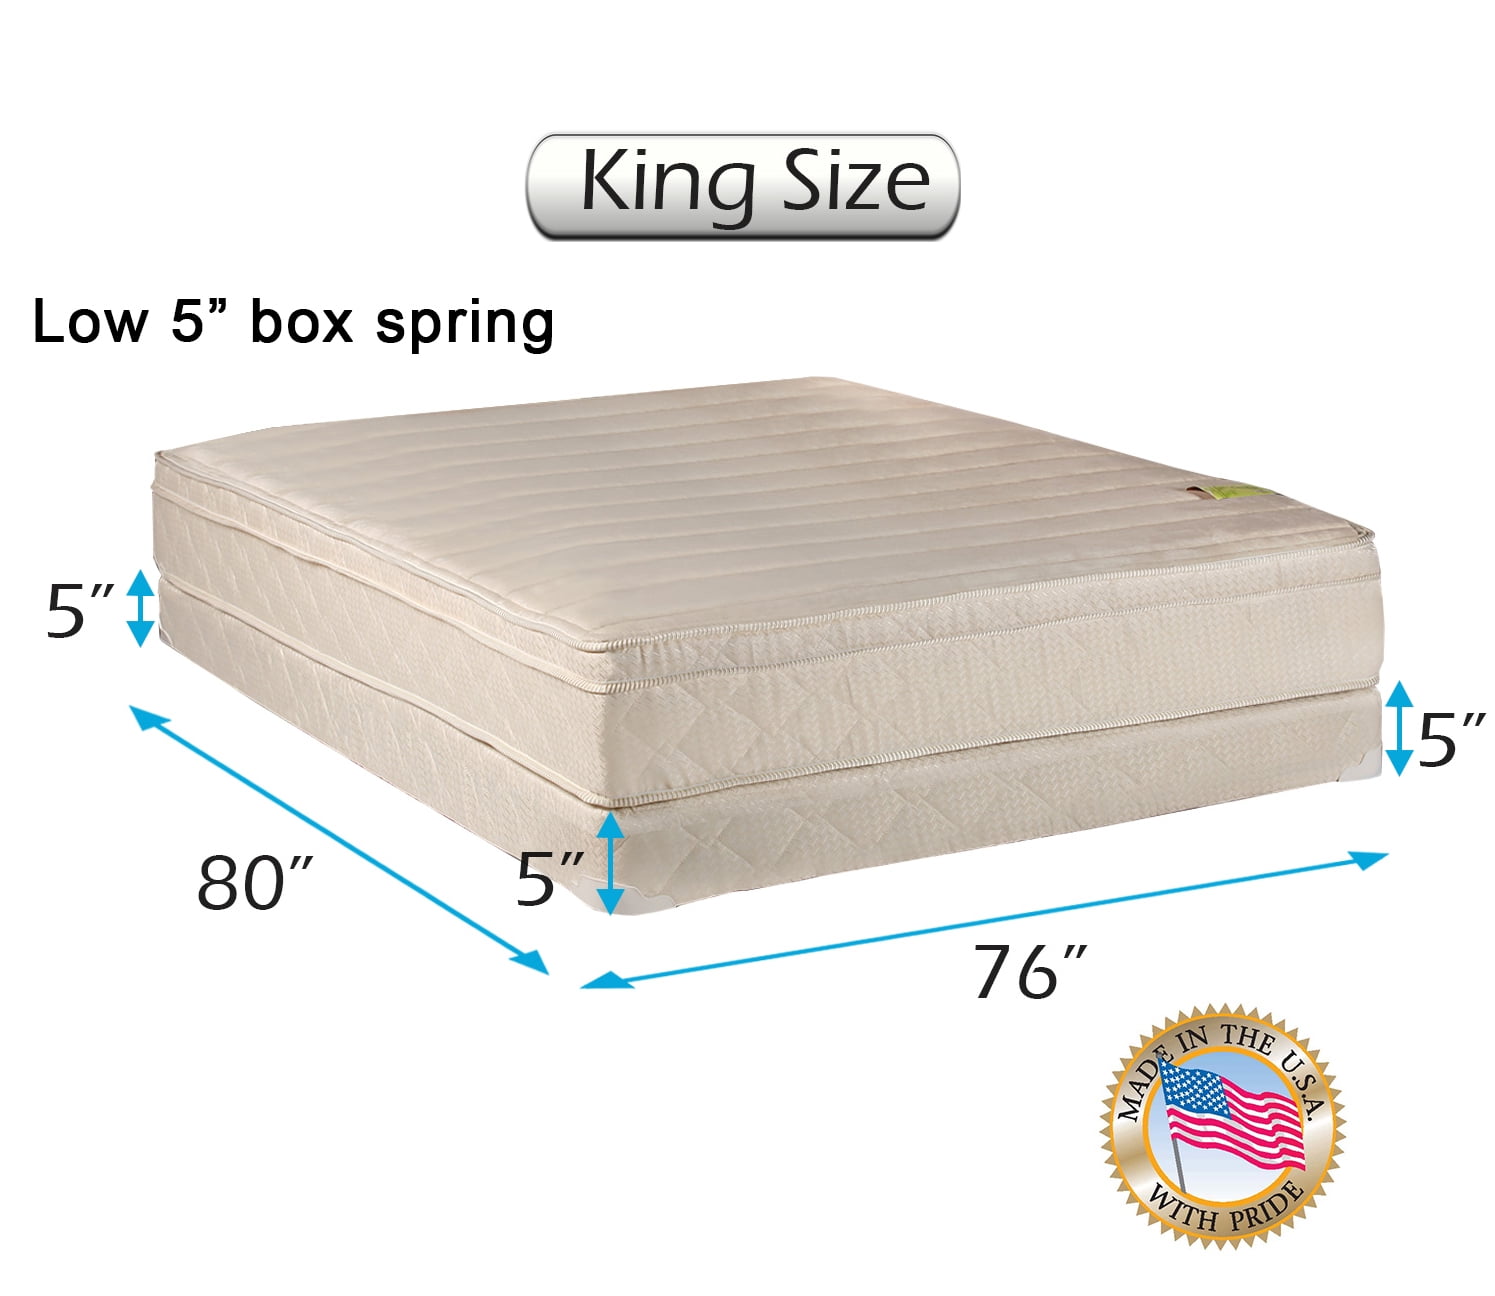 Comfort Pedic Firm Eurotop Pillowtop, King Size Bed Box Spring Dimensions